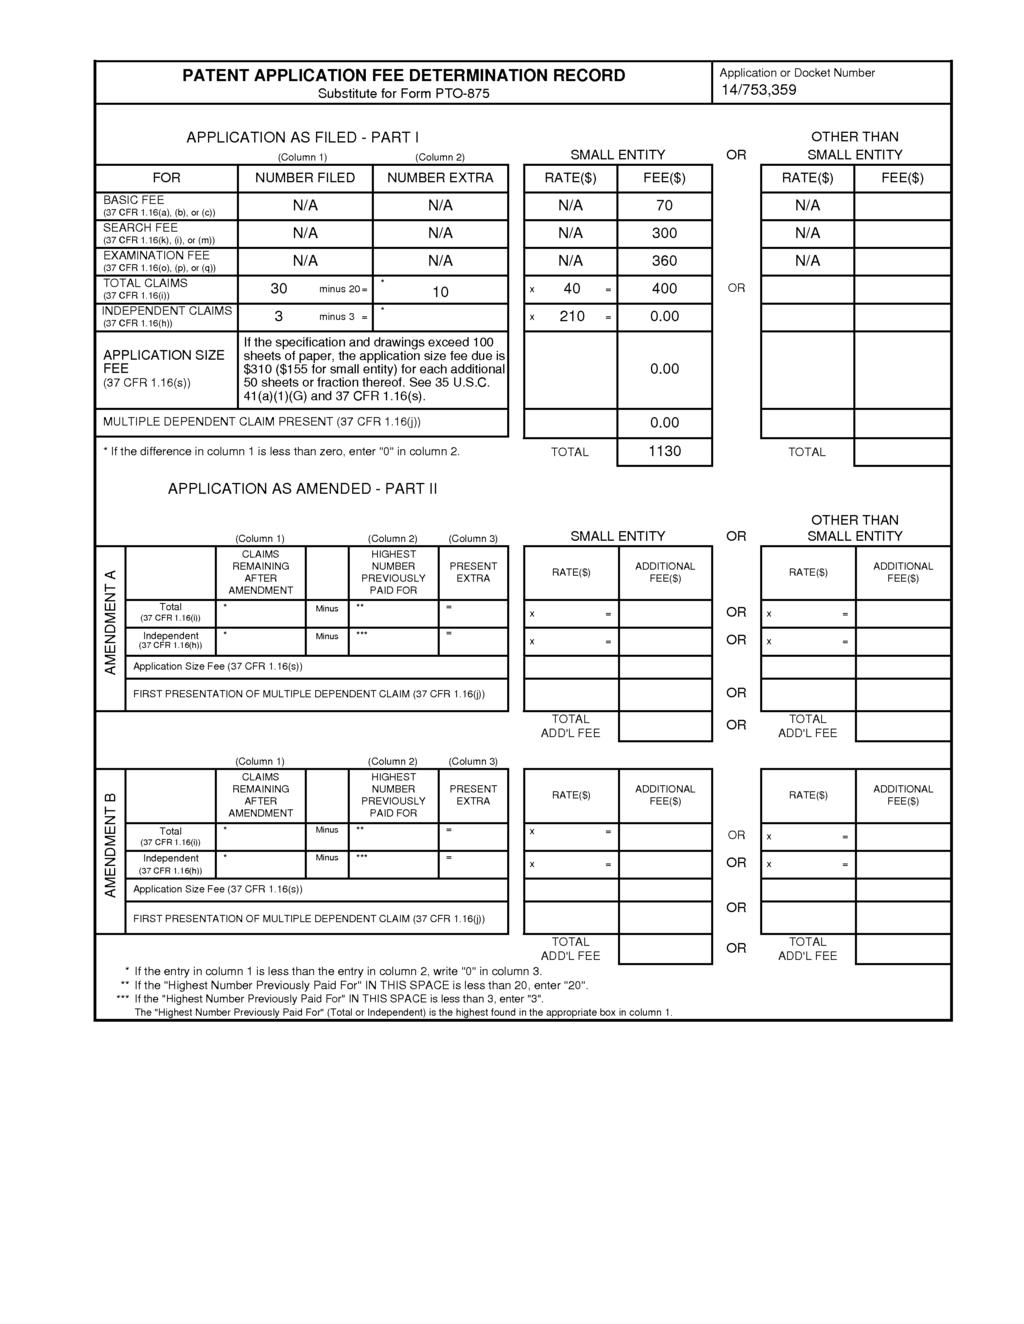 PATENT APPLICATION FEE DETERMINATION RECORD Application or Docket Number Substitute for Form PT0-875 14/753,359 APPLICATION AS FILED - PART I OTHER THAN (Column 1) (Column 2) SMALL ENTITY OR SMALL